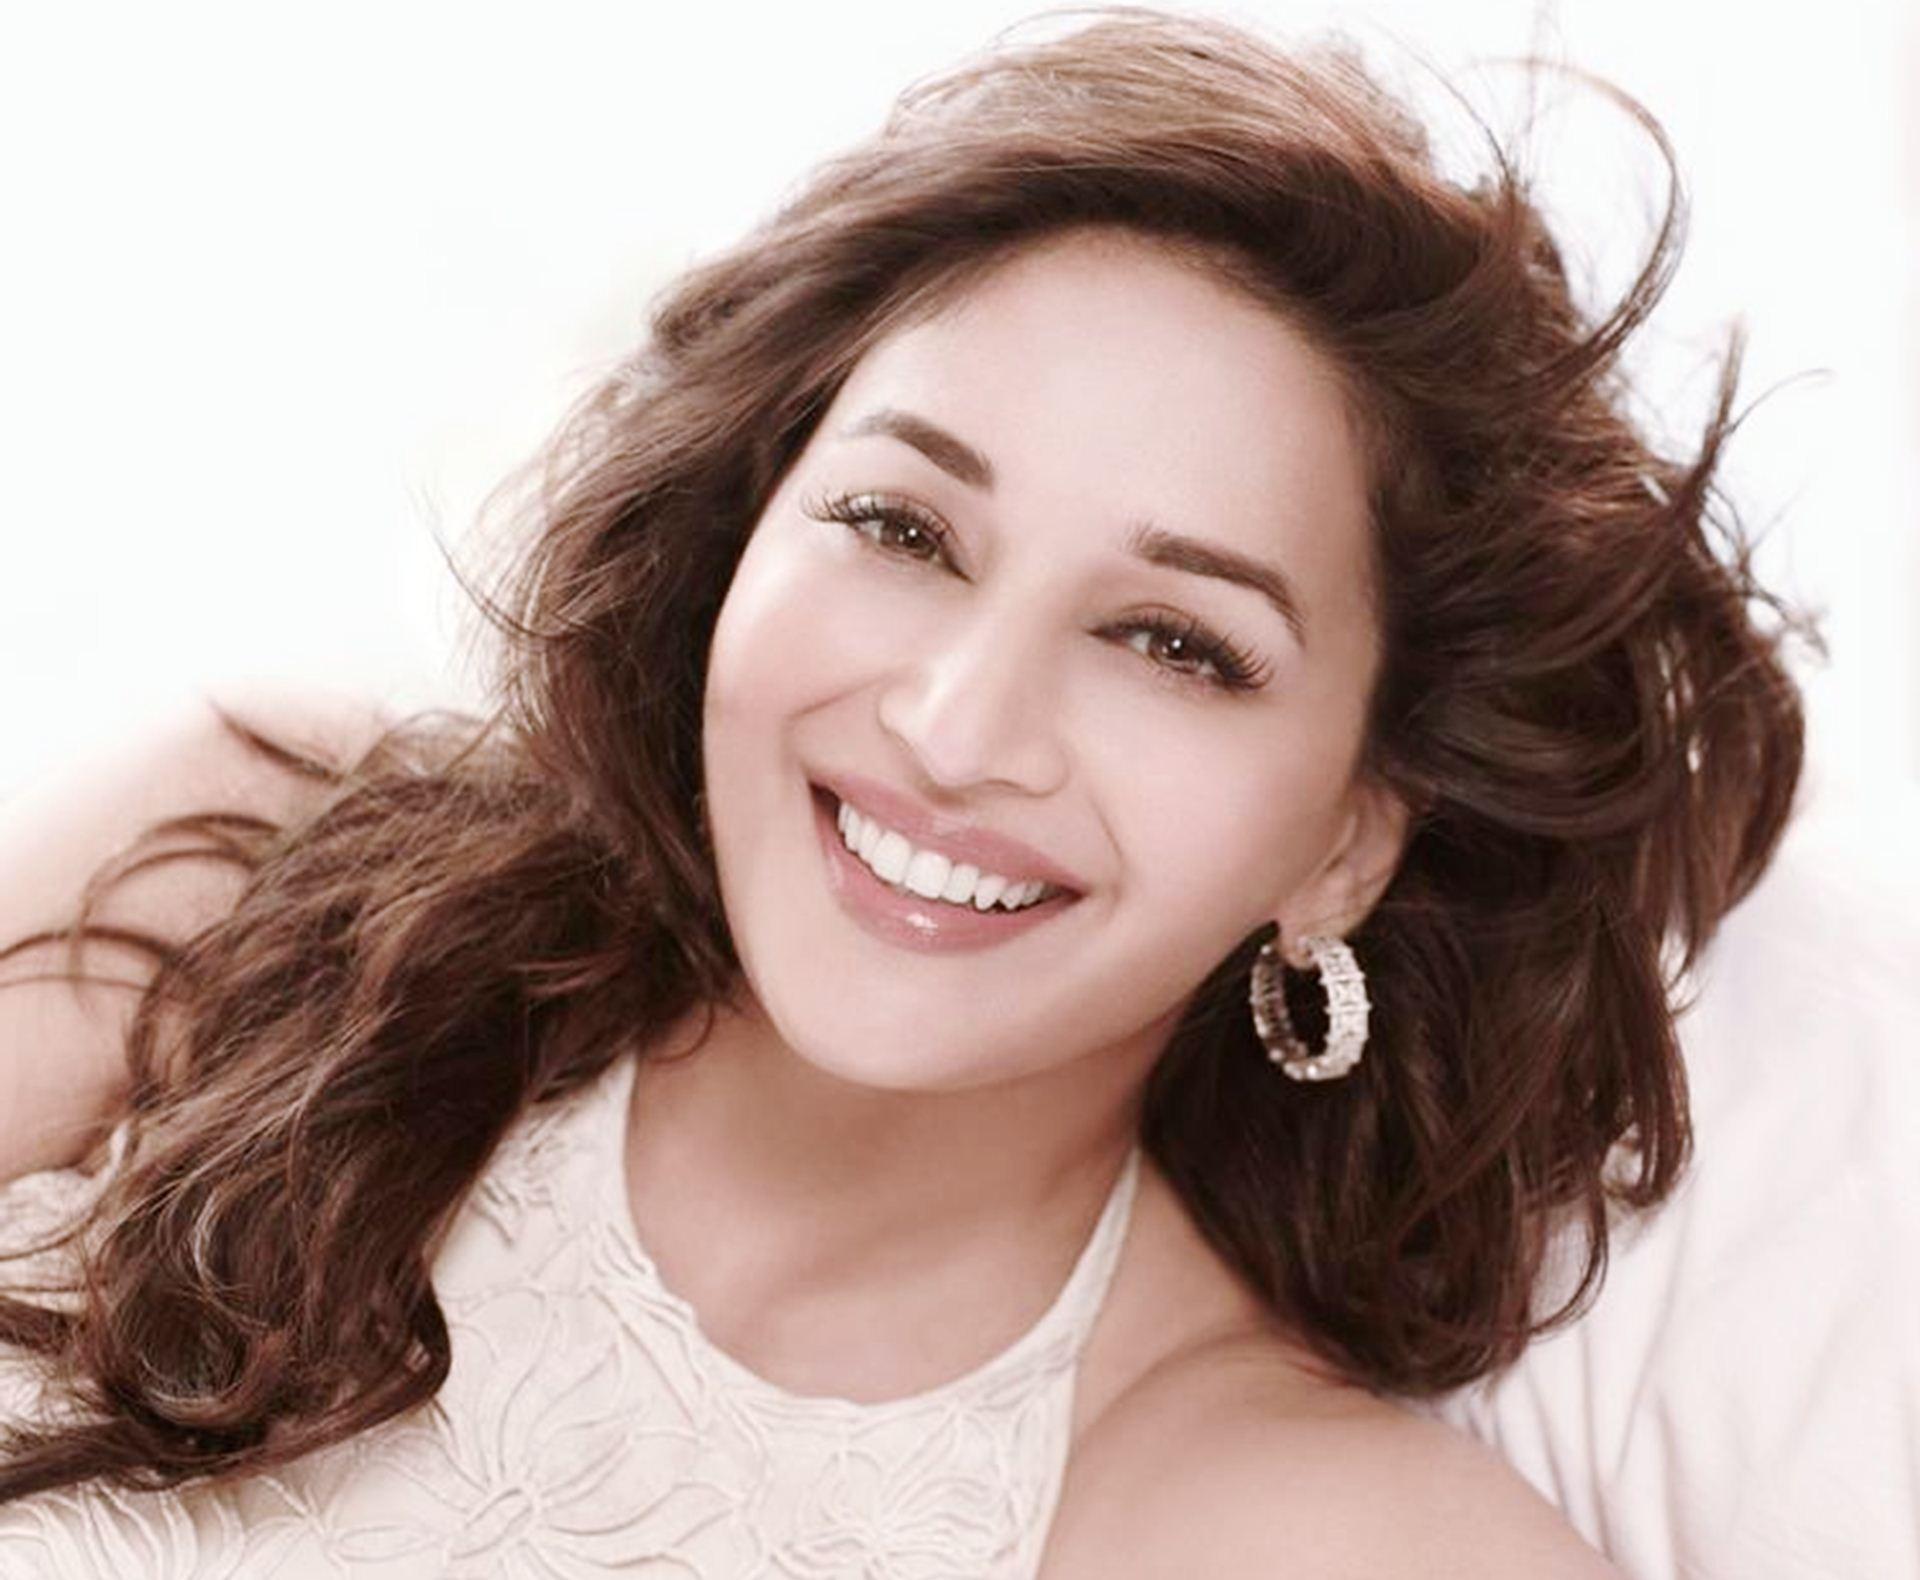 Madhuri Dixit Bollywood Actress High Quality Wallpapers.